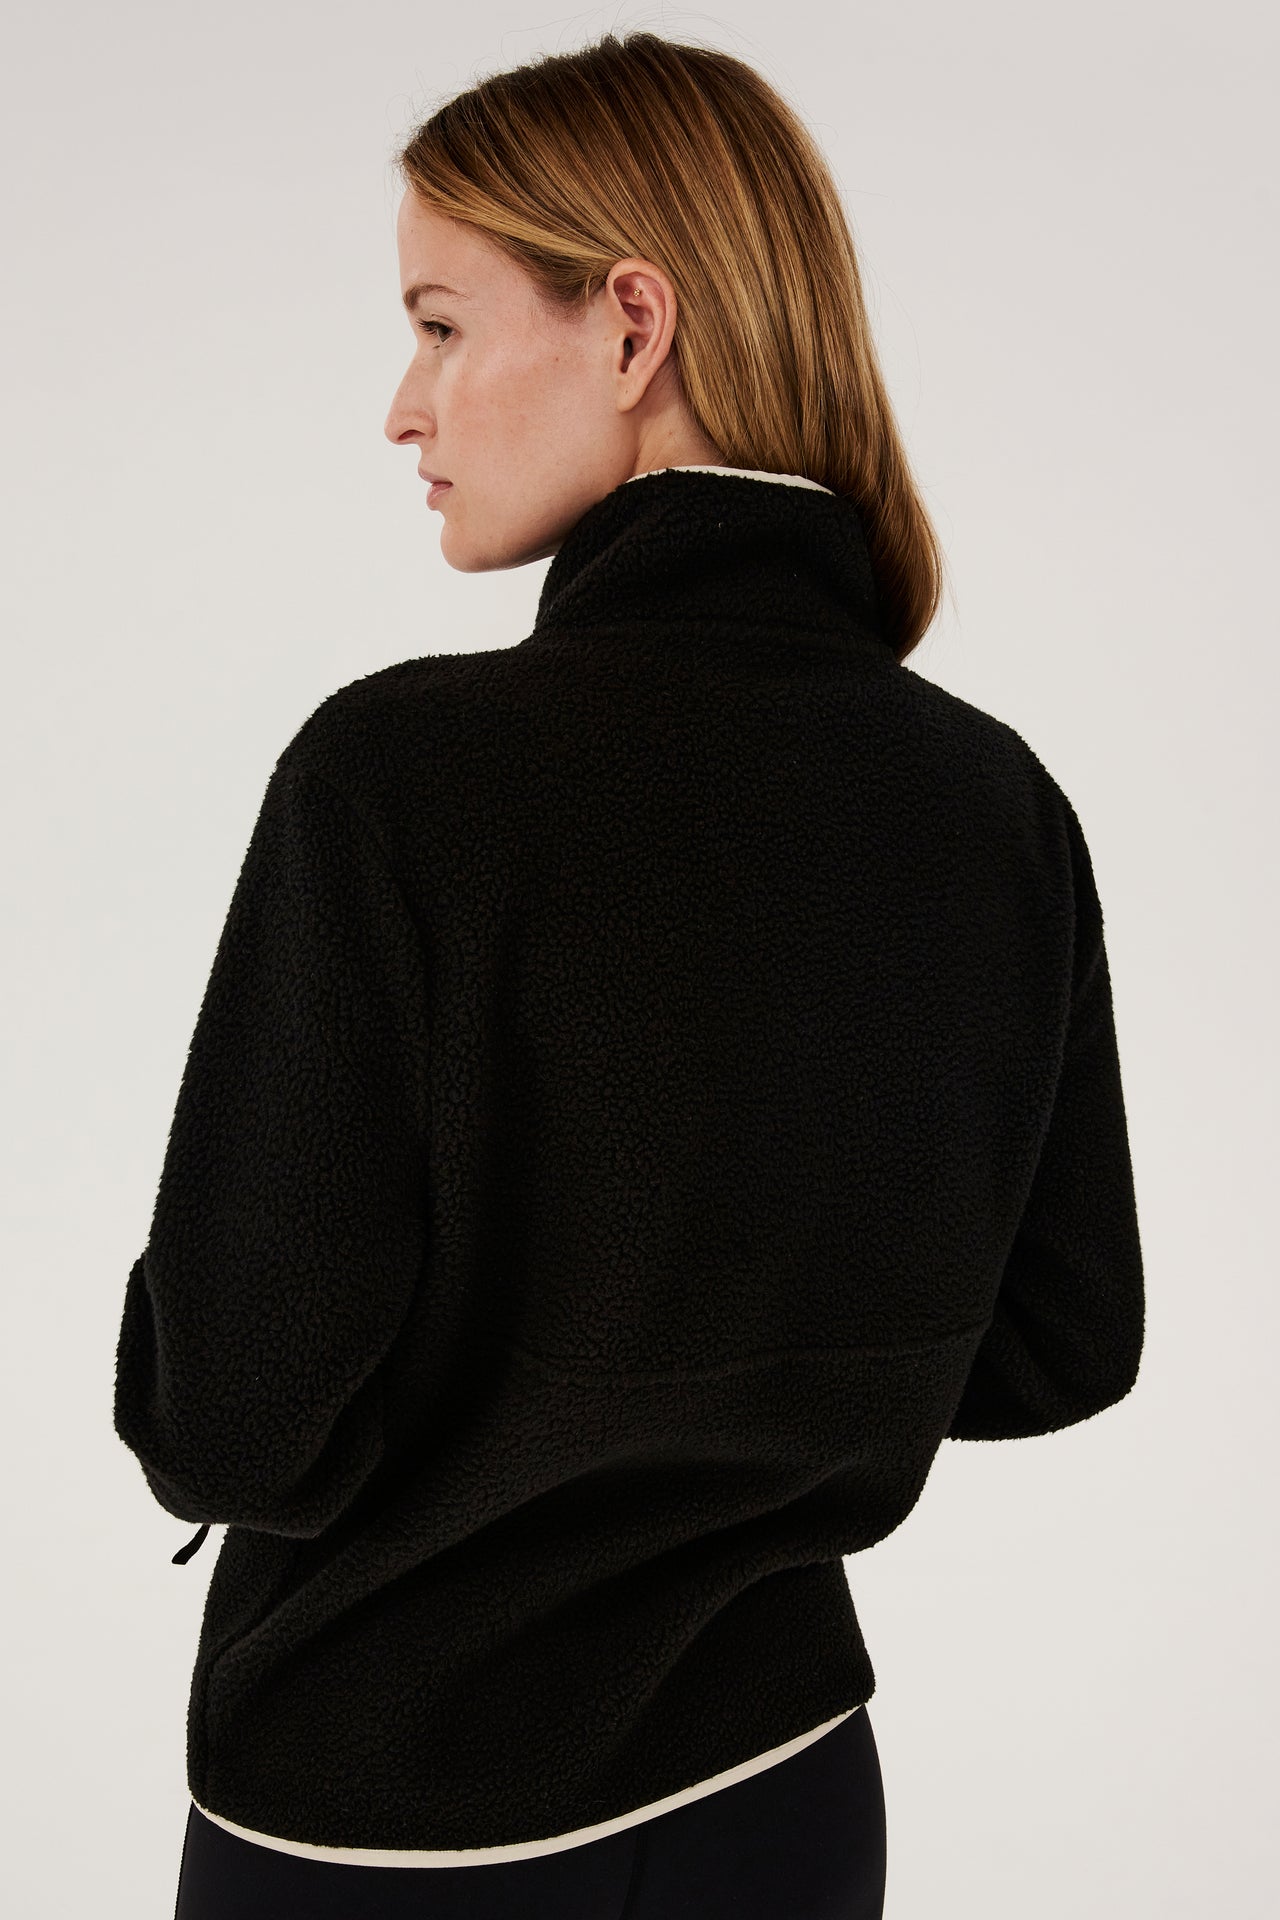 The back view of a woman wearing a SPLITS59 Libby Sherpa Half Zip in Black/Creme.